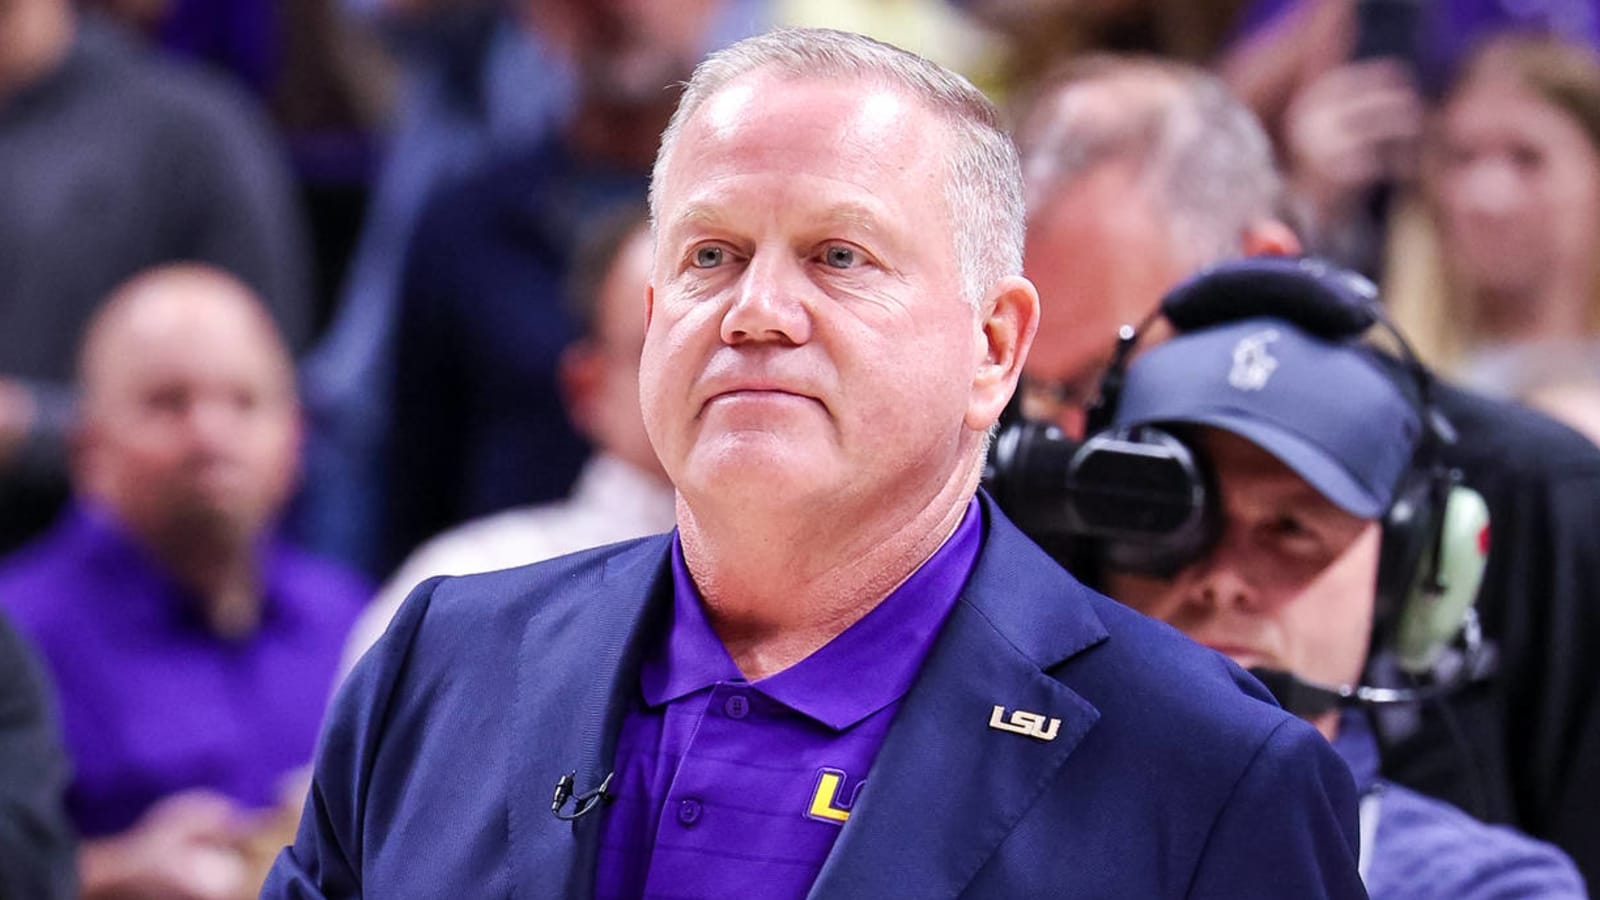 New LSU coach Brian Kelly seemingly debuts Southern accent in speech to fans